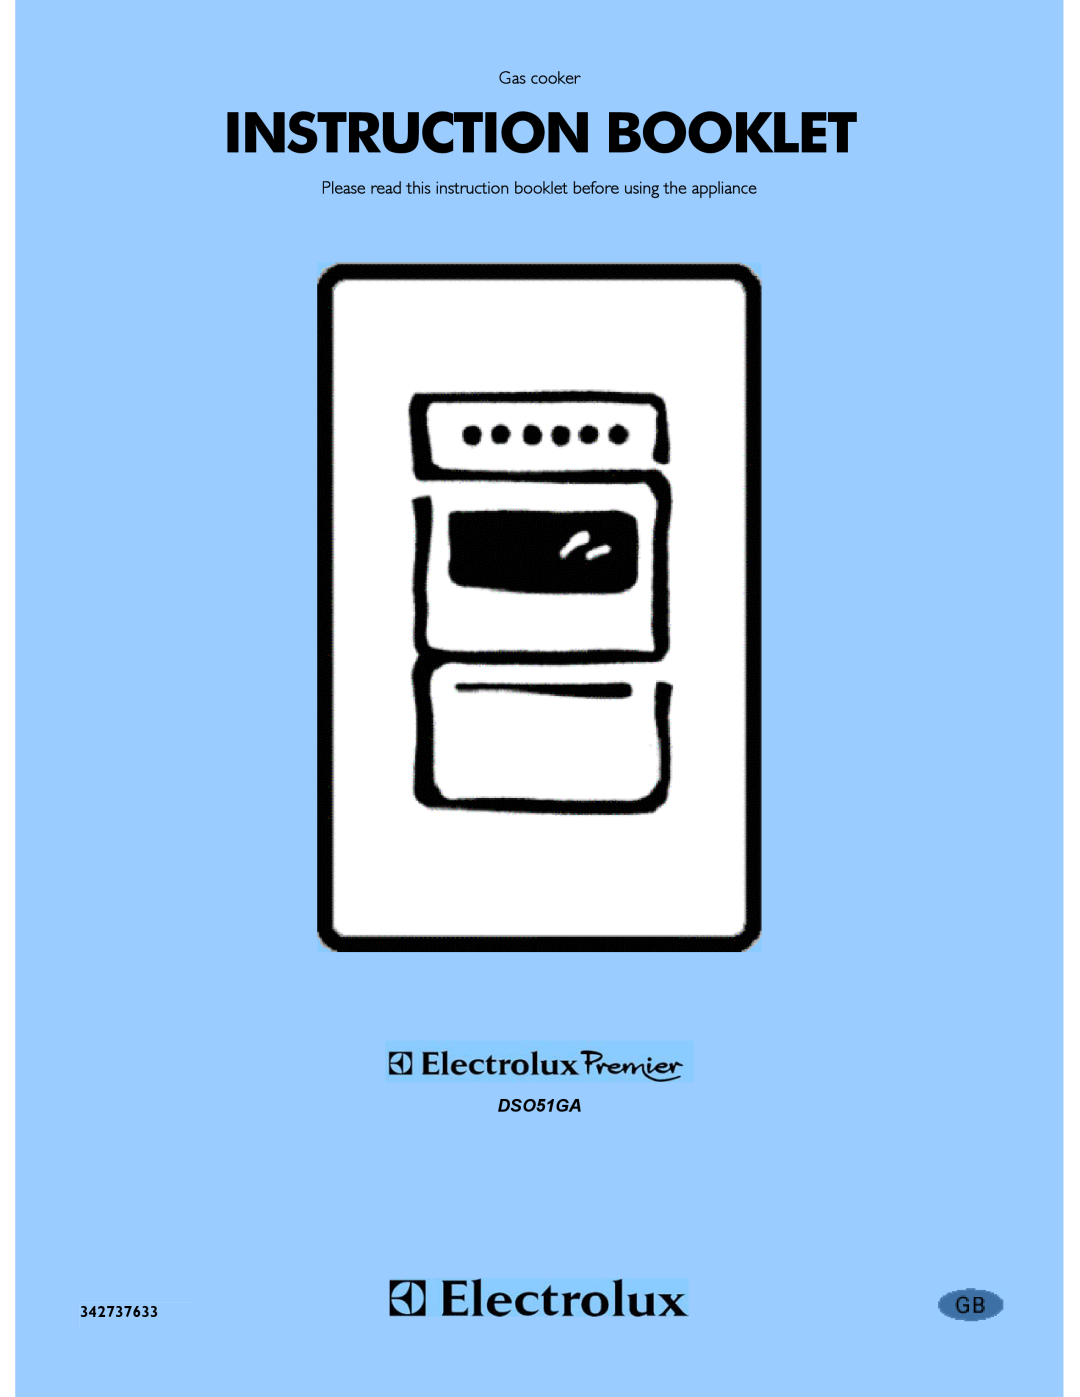 Electrolux DSO51GA manual Instruction Booklet, Gas cooker, Please read this instruction booklet before using the appliance 